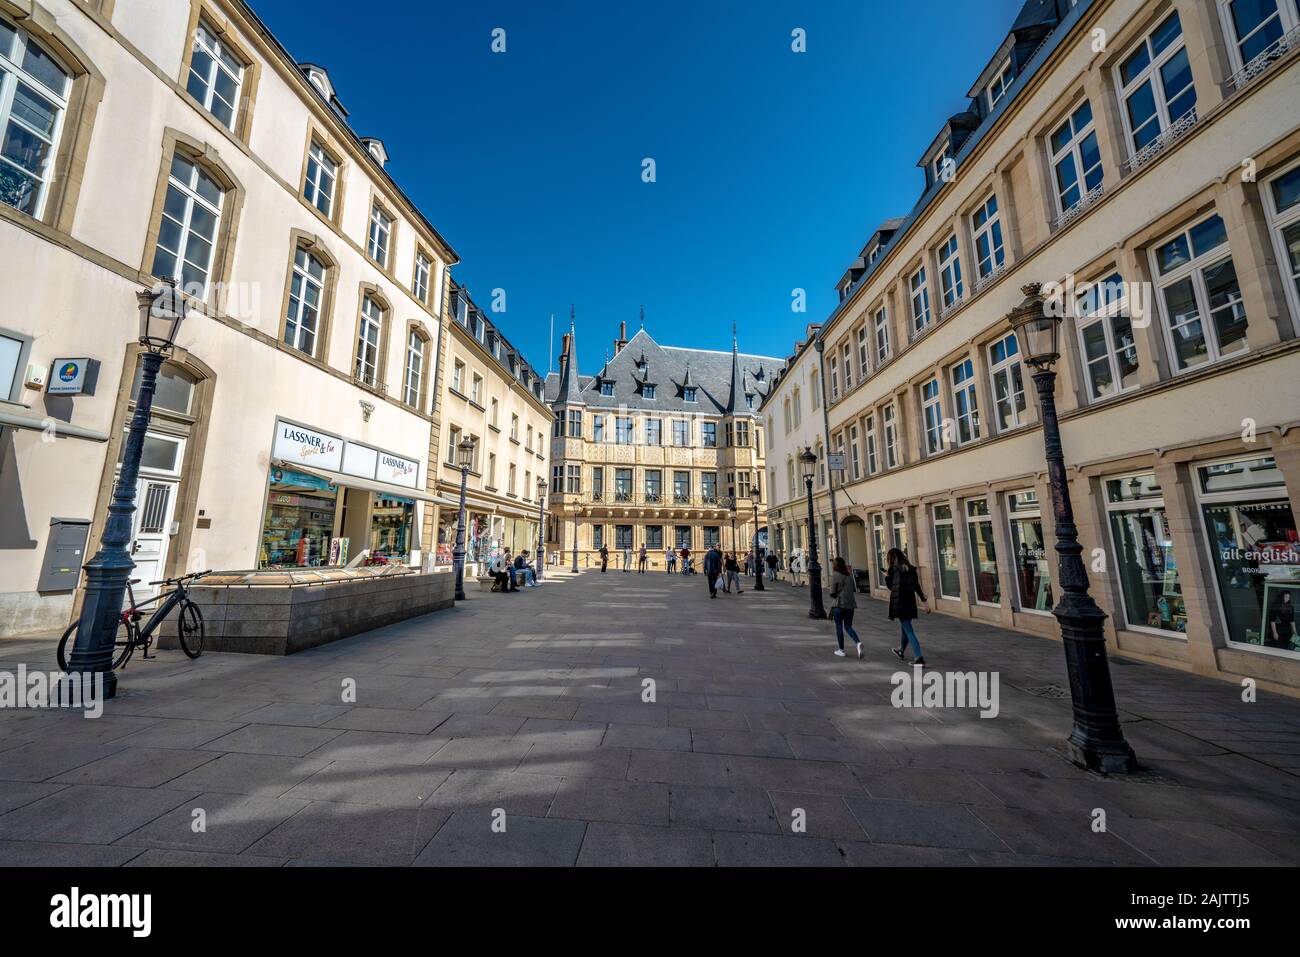 LUXEMBOURG CITY, LUXEMBOURG - SEPTEMBER 21: This is a city street with traditional architecture in Ville Haute, the old historic quarter on September Stock Photo